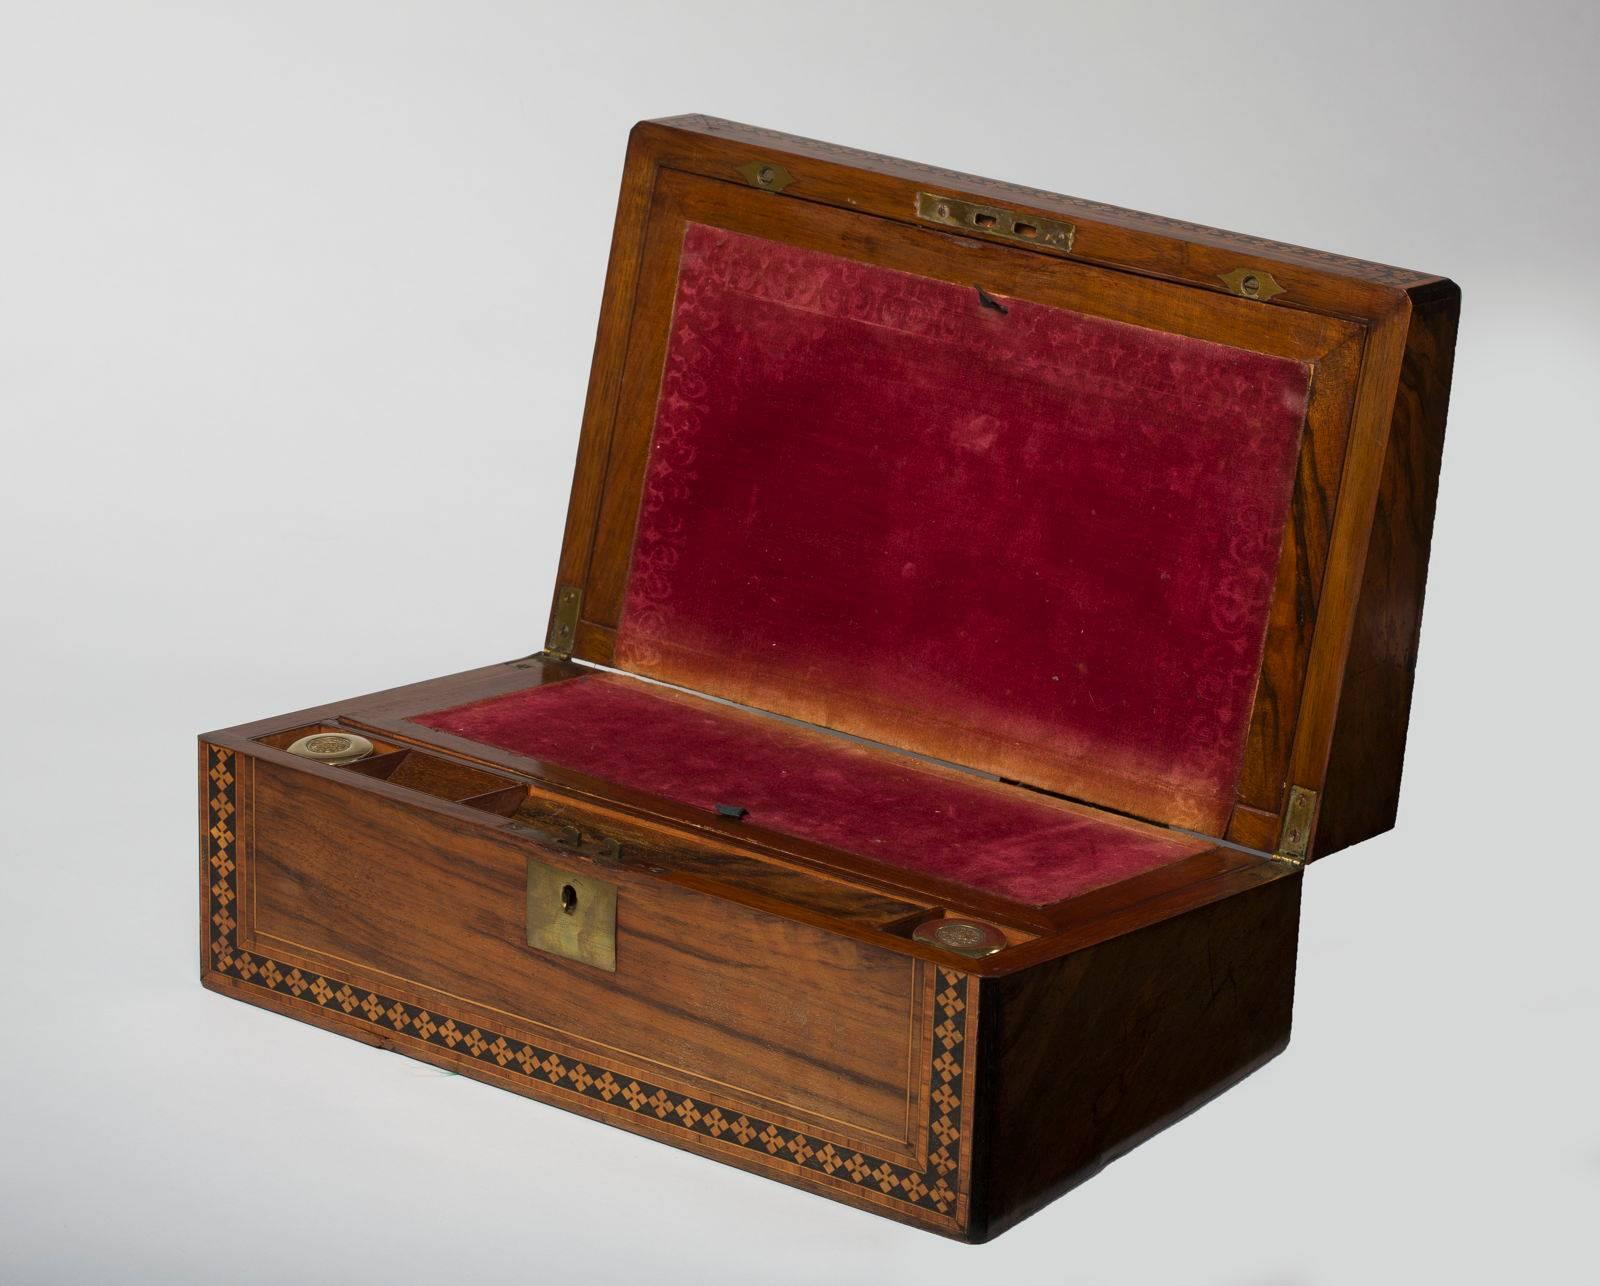 High Victorian English Writing Slope Marquetry Box, 19th Century For Sale